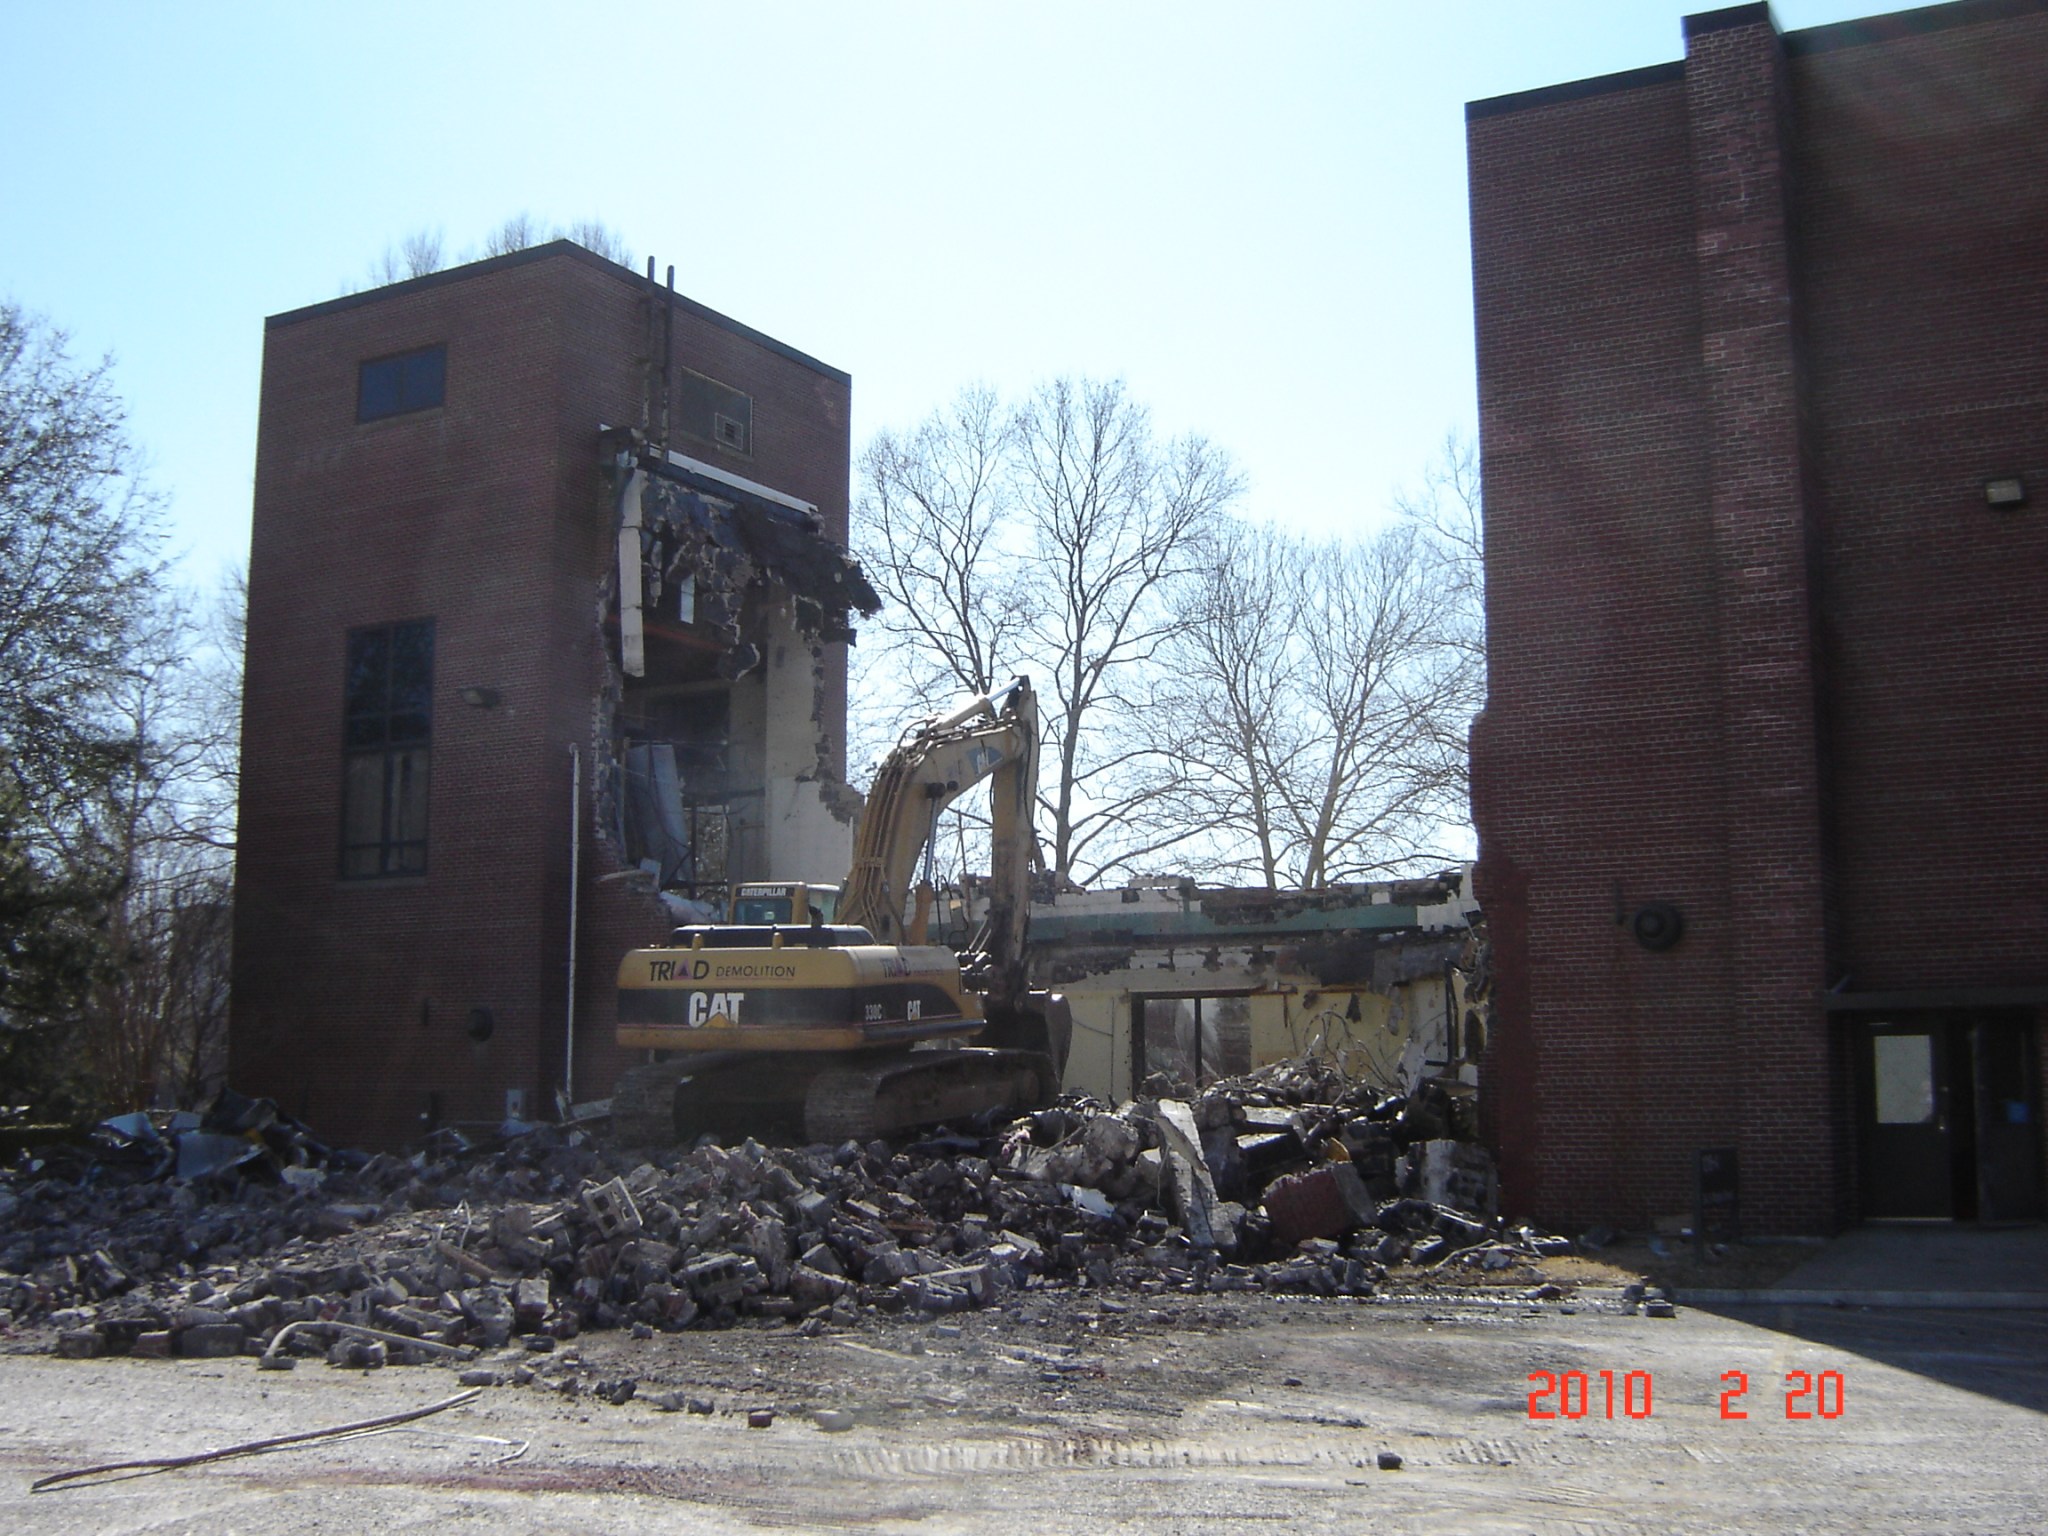 February 2010 photograph of the demolition of Building 1218.